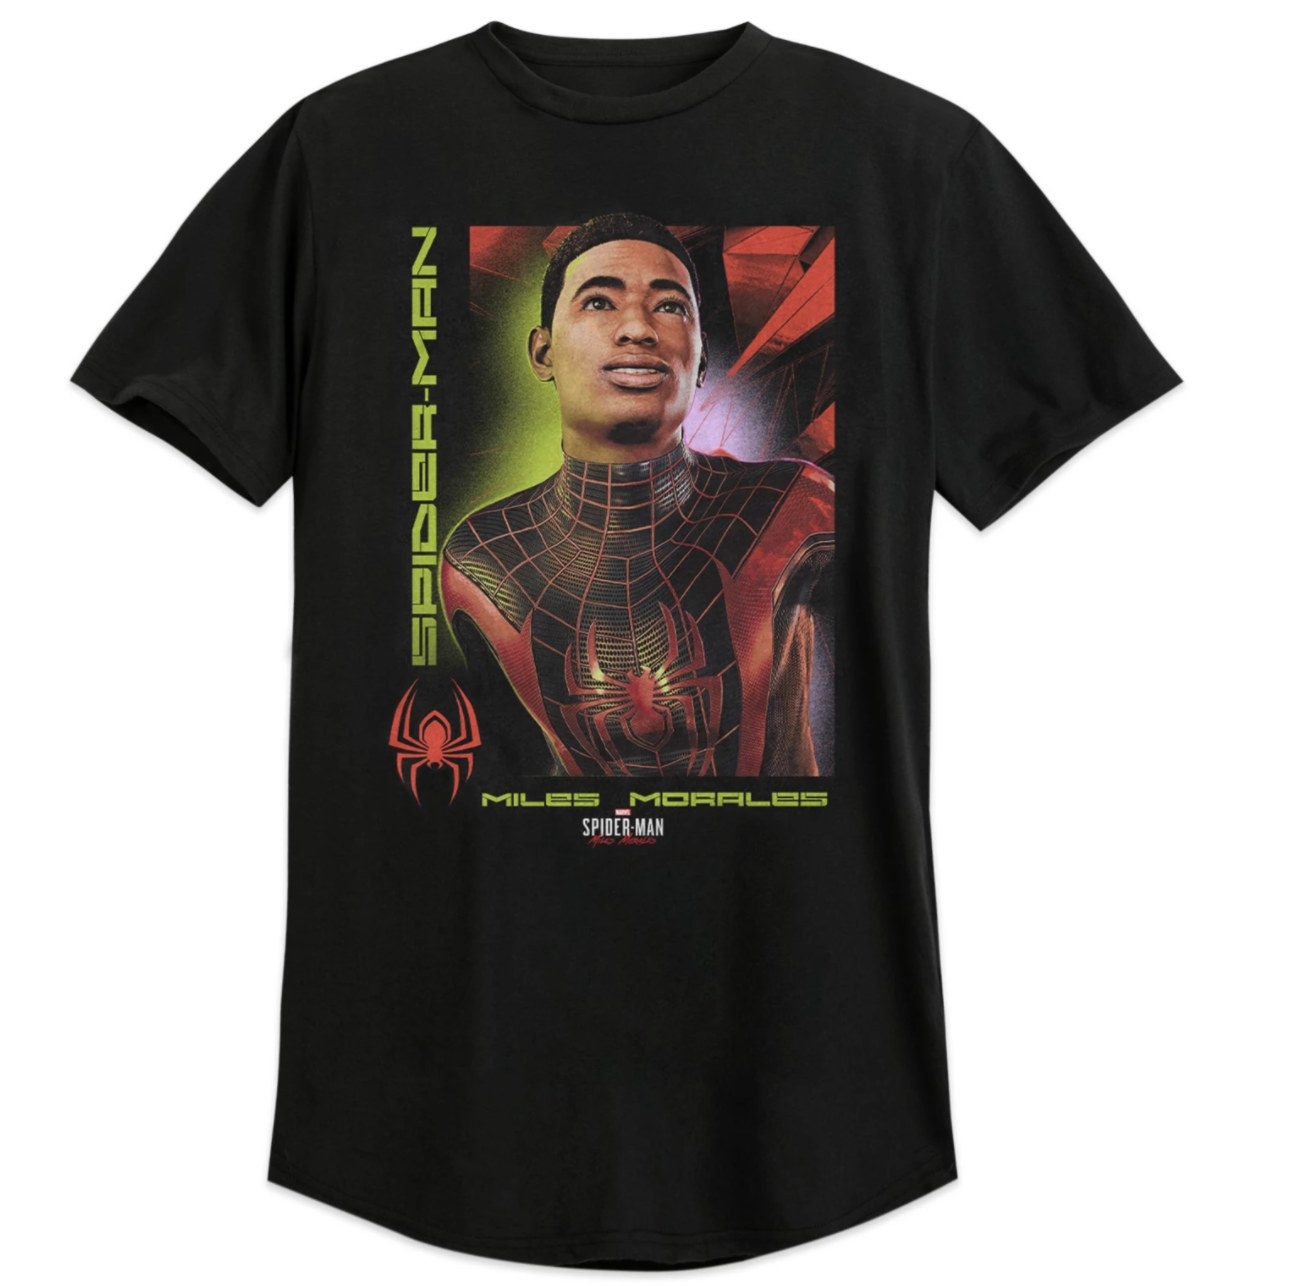 the black shirt with miles morales in spider-man costume